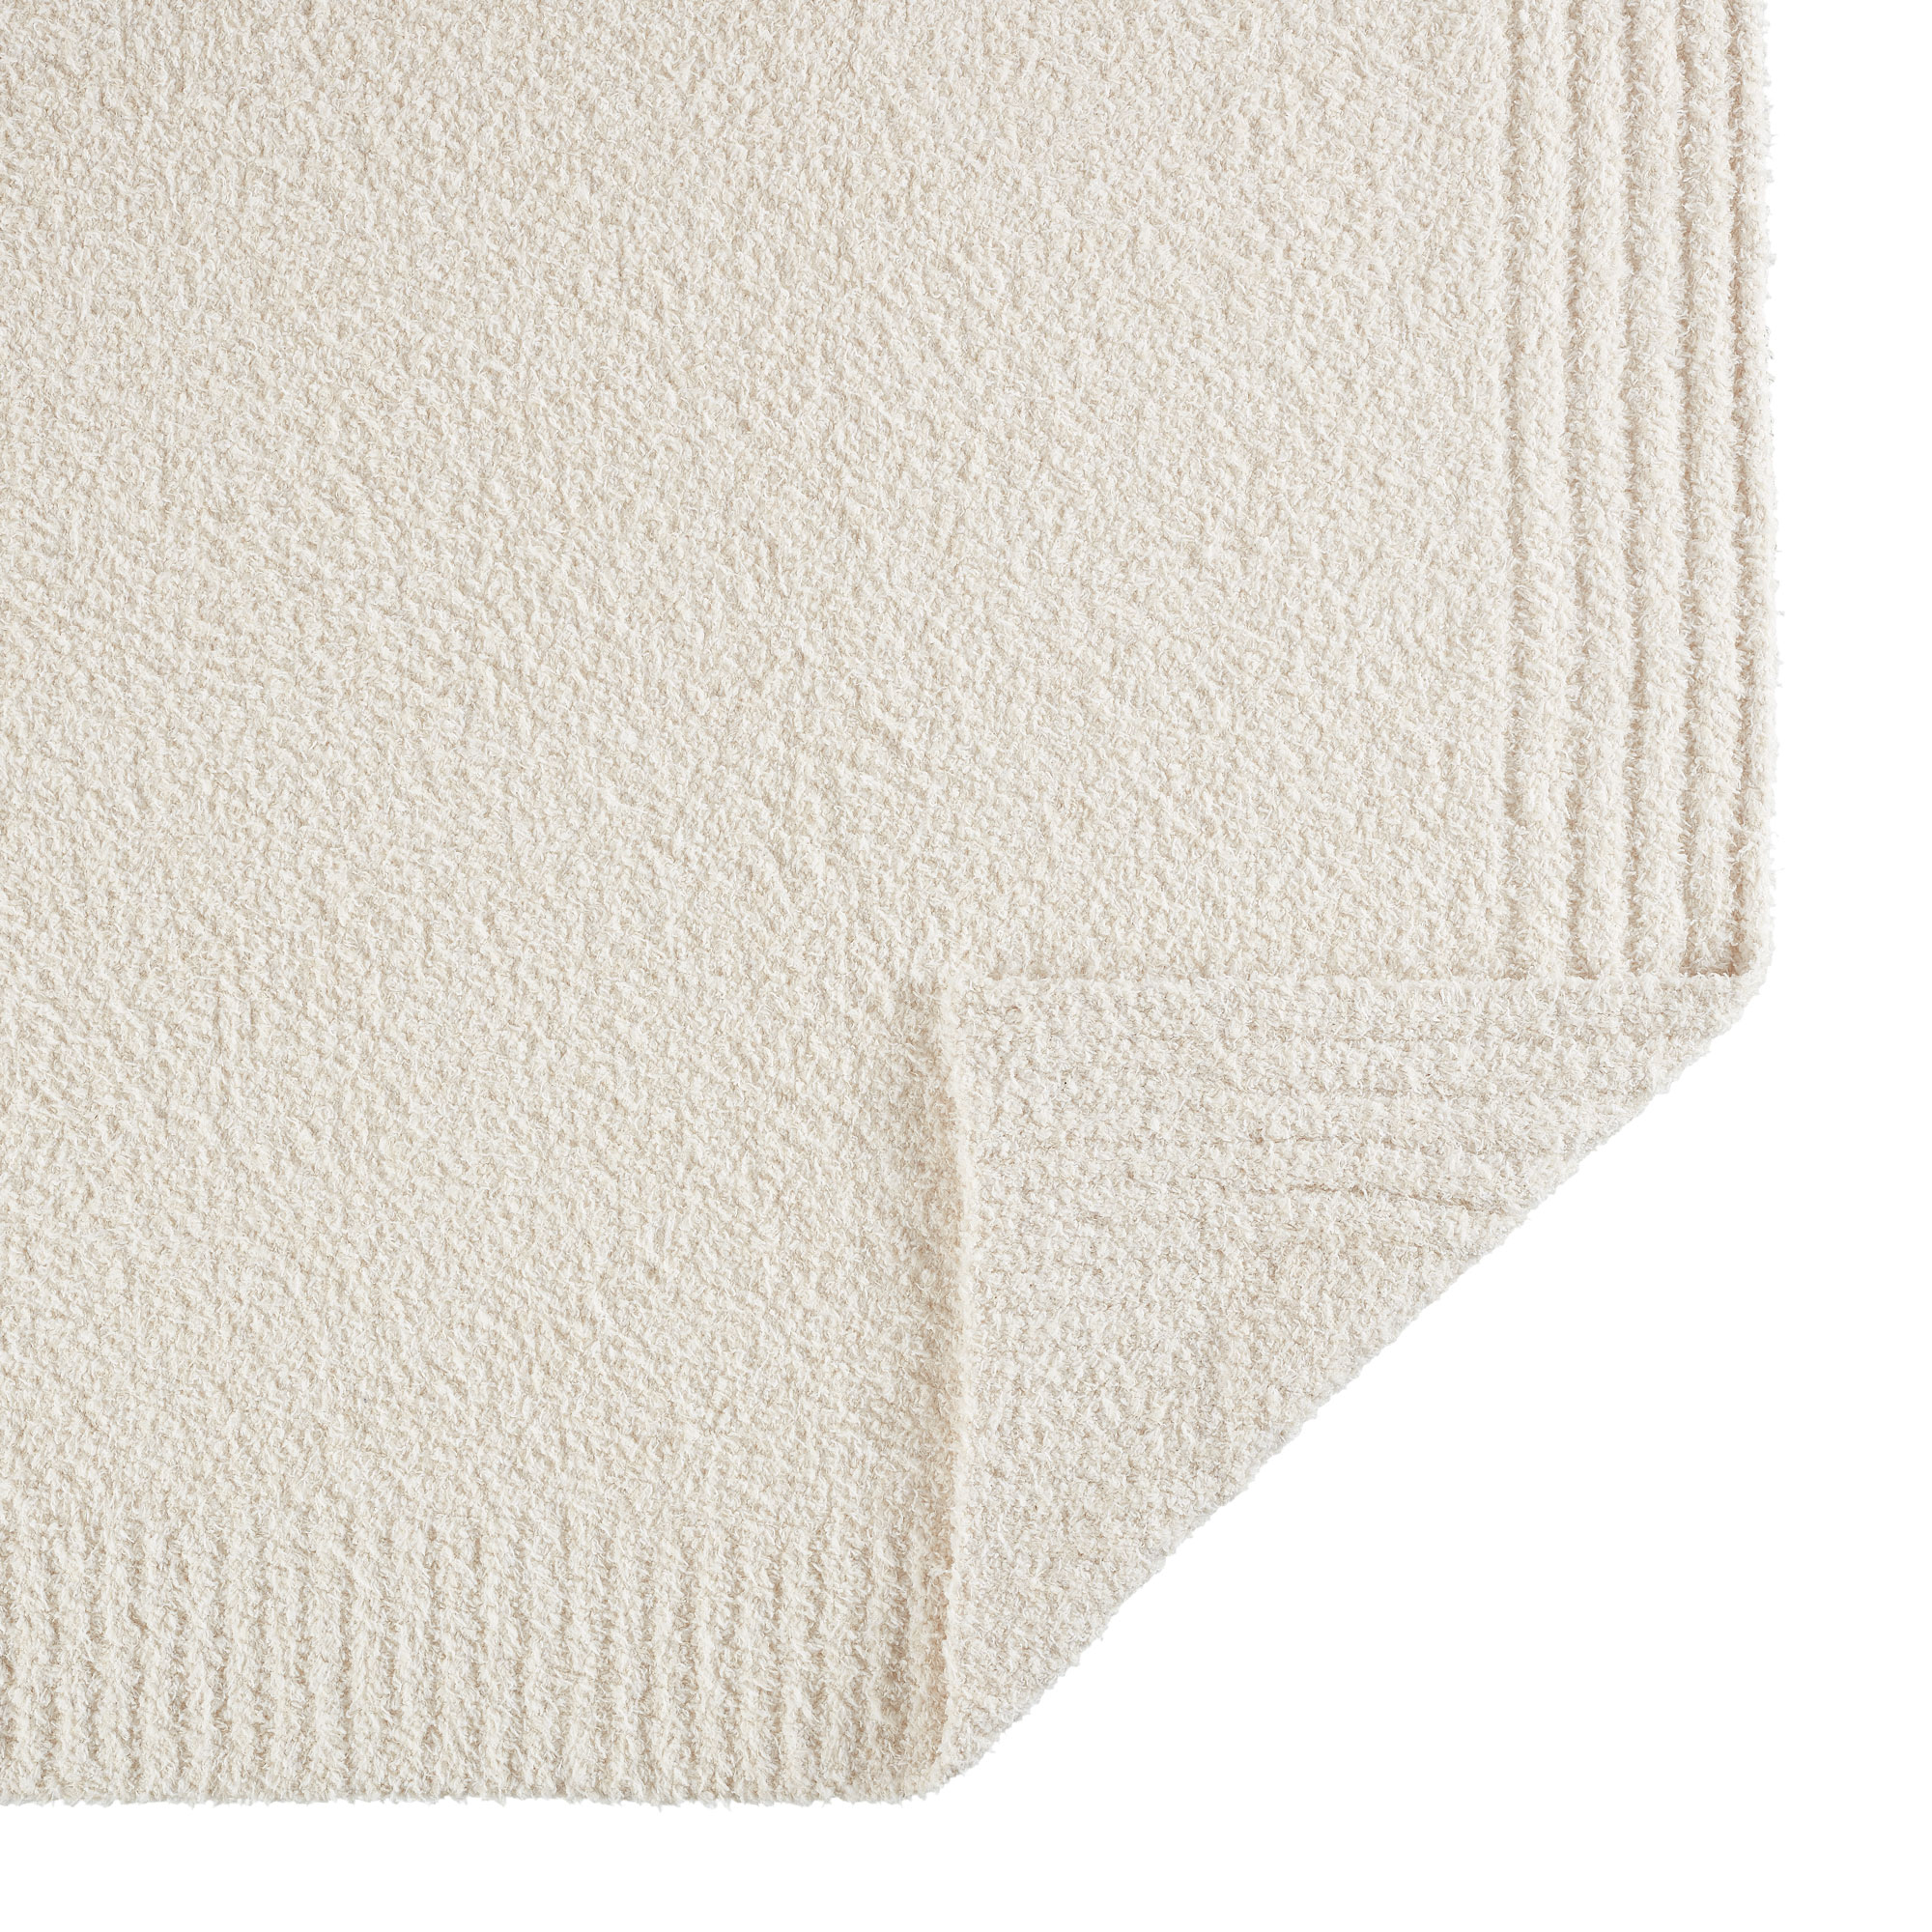 Better Homes & Gardens Cozy Knit Throw, 50"x72", Cream - image 3 of 5